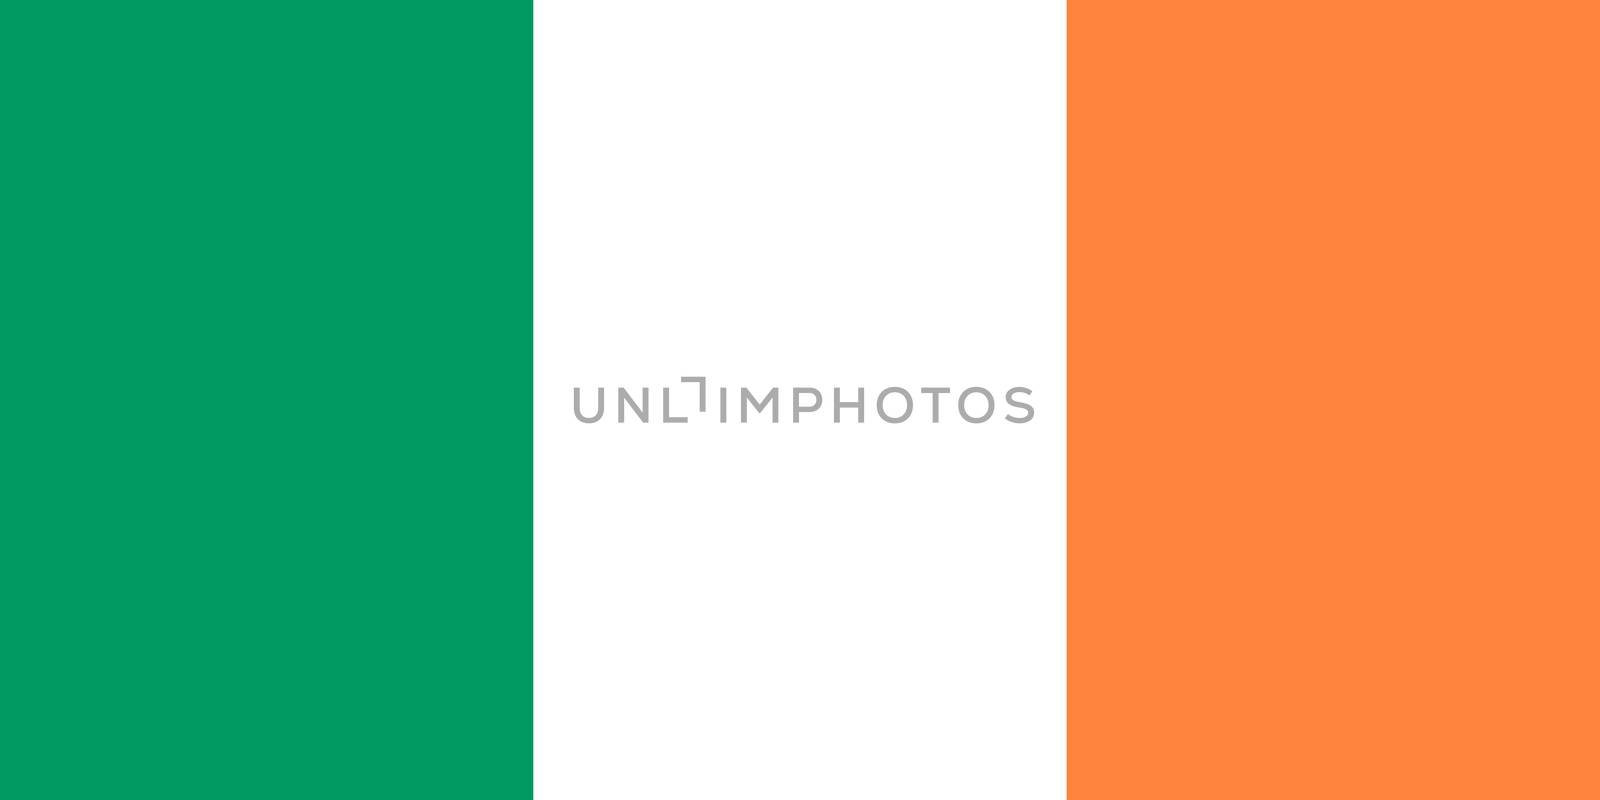 Irish flag by paolo77